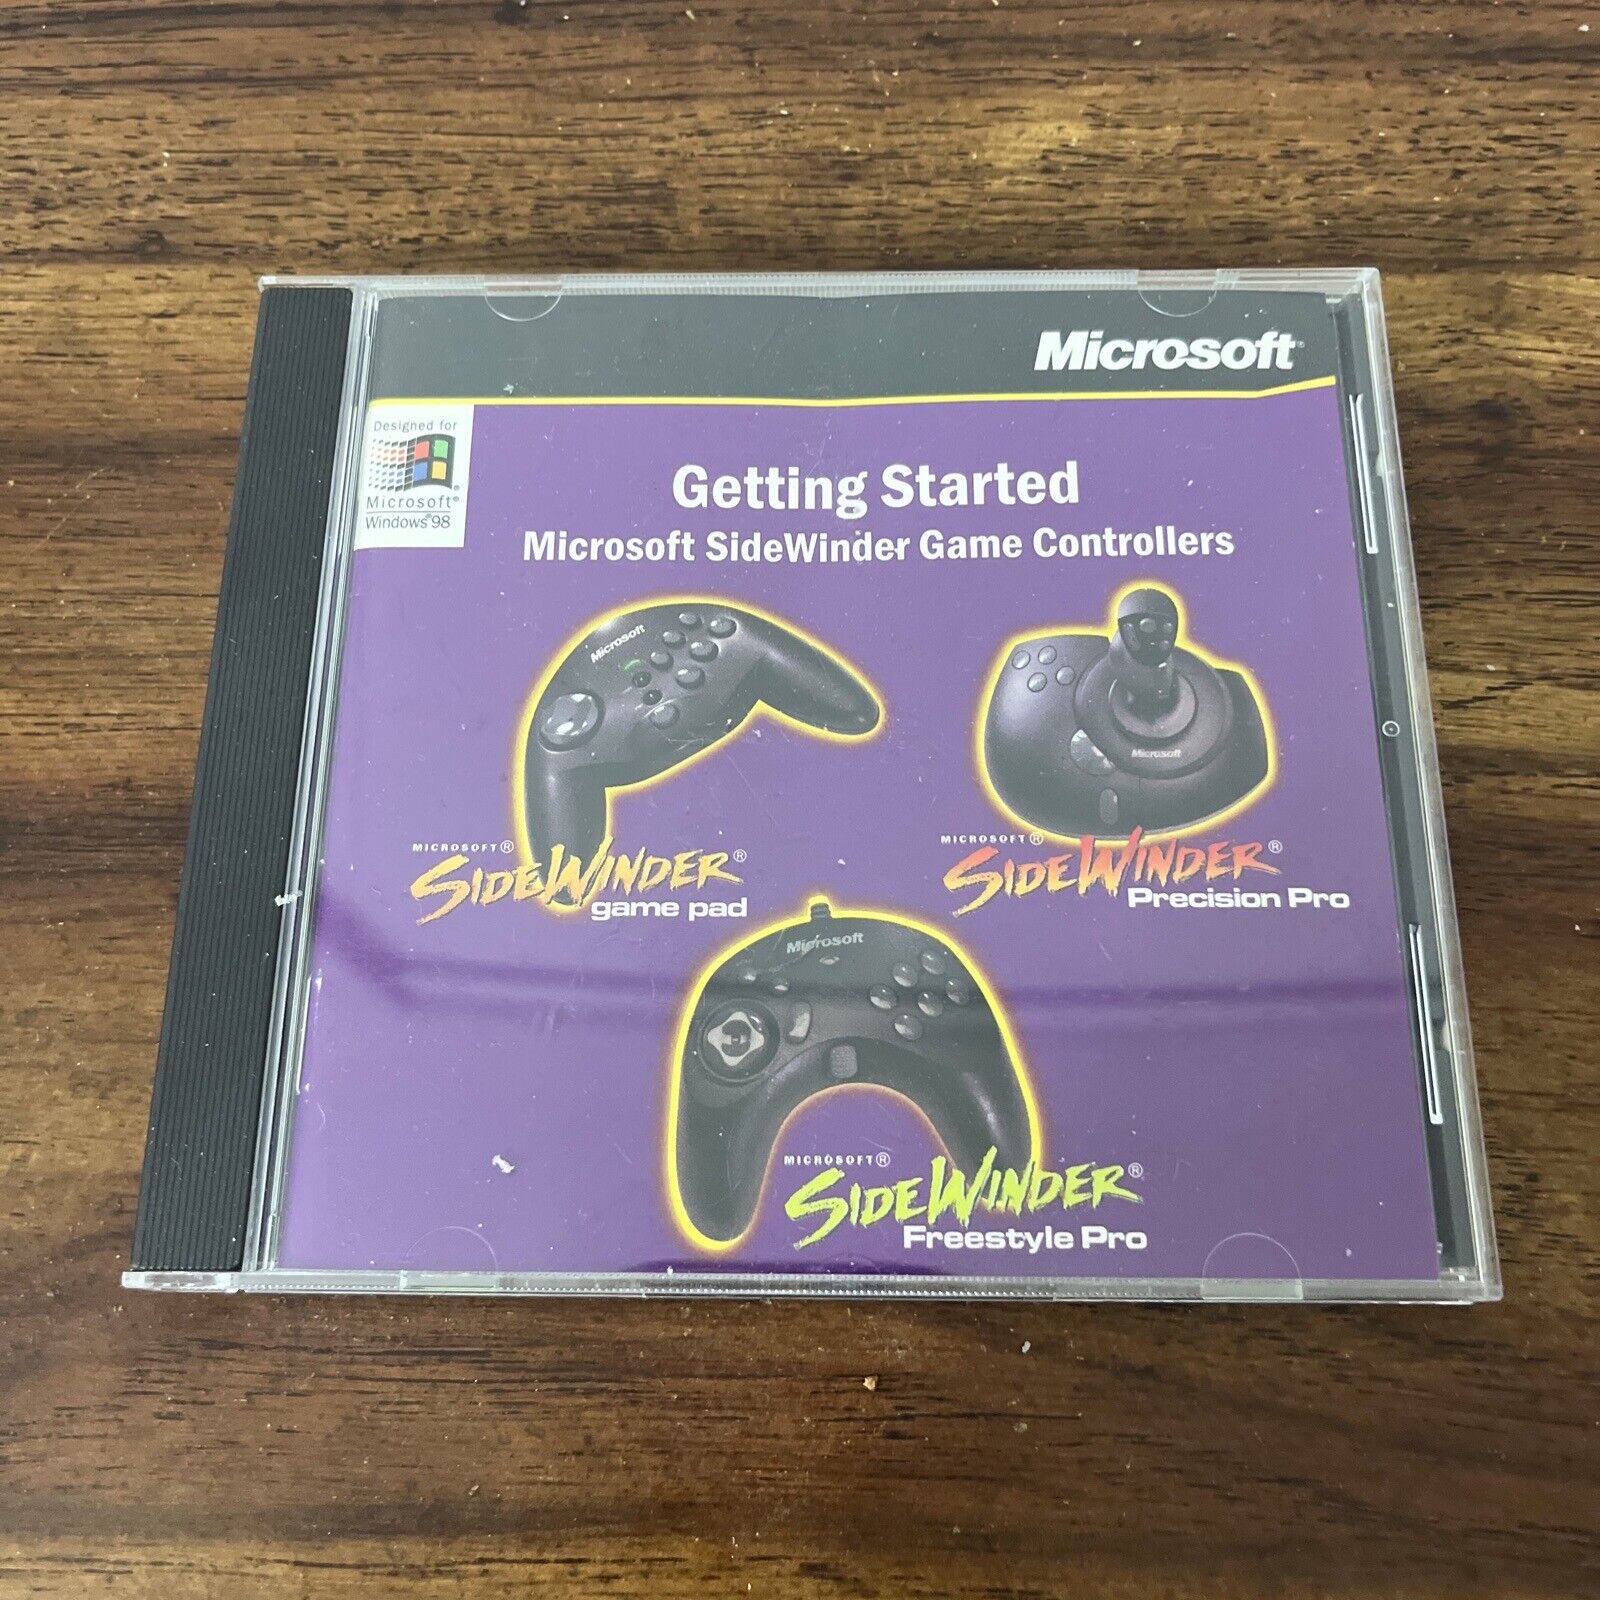 Microsoft SideWinder Getting Started Game Controller Software 3.0 CD-ROM PC 1998